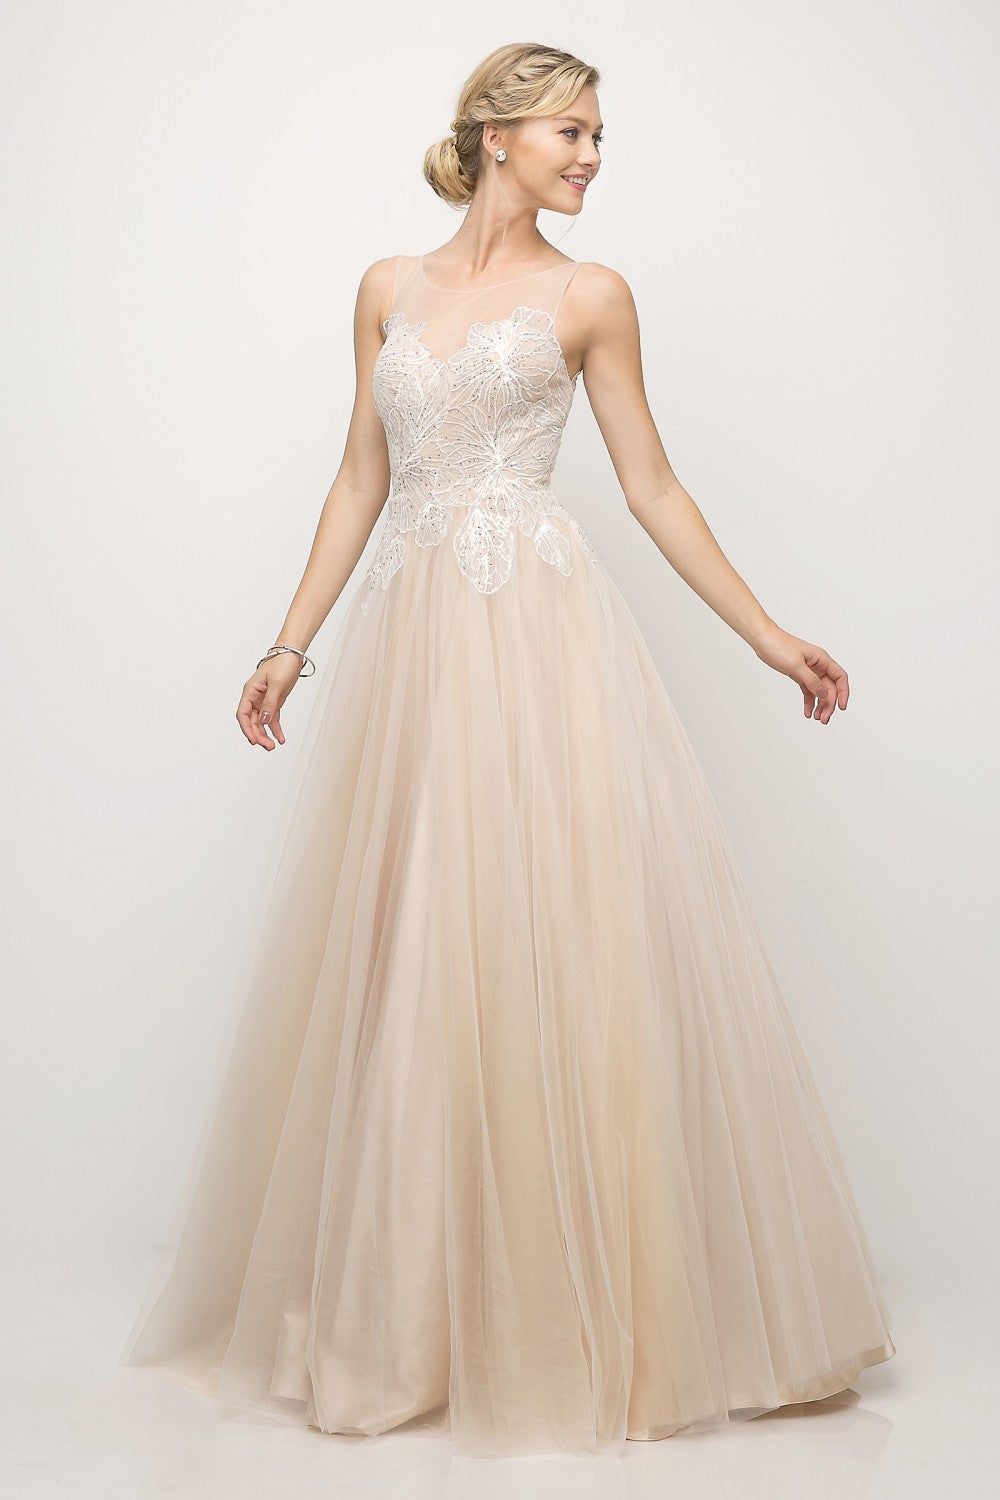 MyFashion.com - A-line tulle gown with lace bodice and illusion neckline(UE009) - Cinderella Divine promdress eveningdress fashion partydress weddingdress 
 gown homecoming promgown weddinggown 